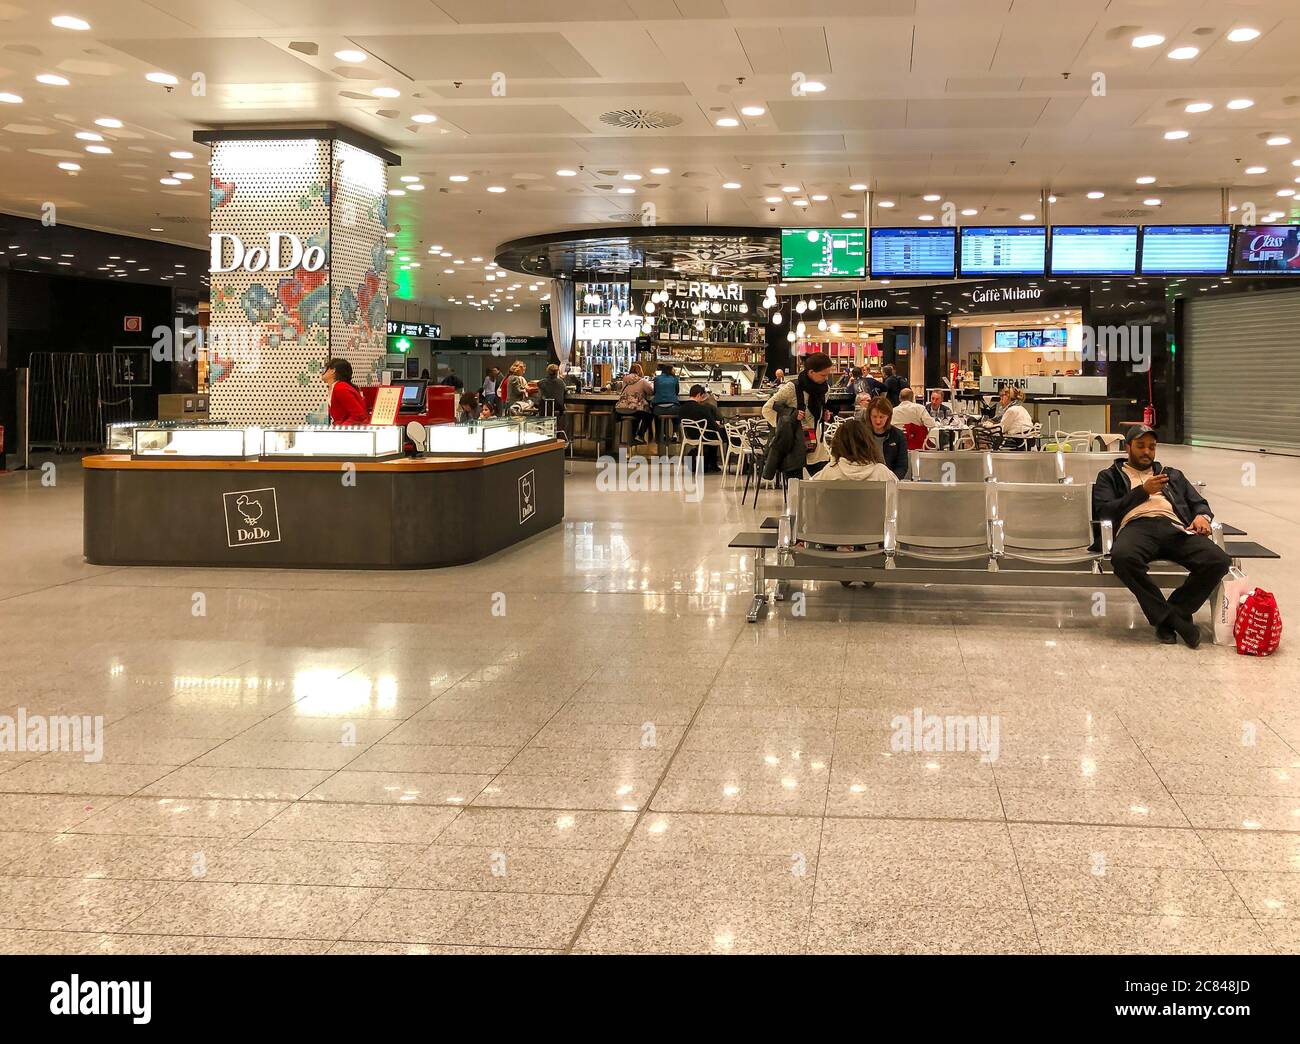 Ferno, Milan-Malpensa, Italy - February 8, 2020: Interiors with shops and bars in the Terminal 1 of Milan-Malpensa International Airport. Stock Photo